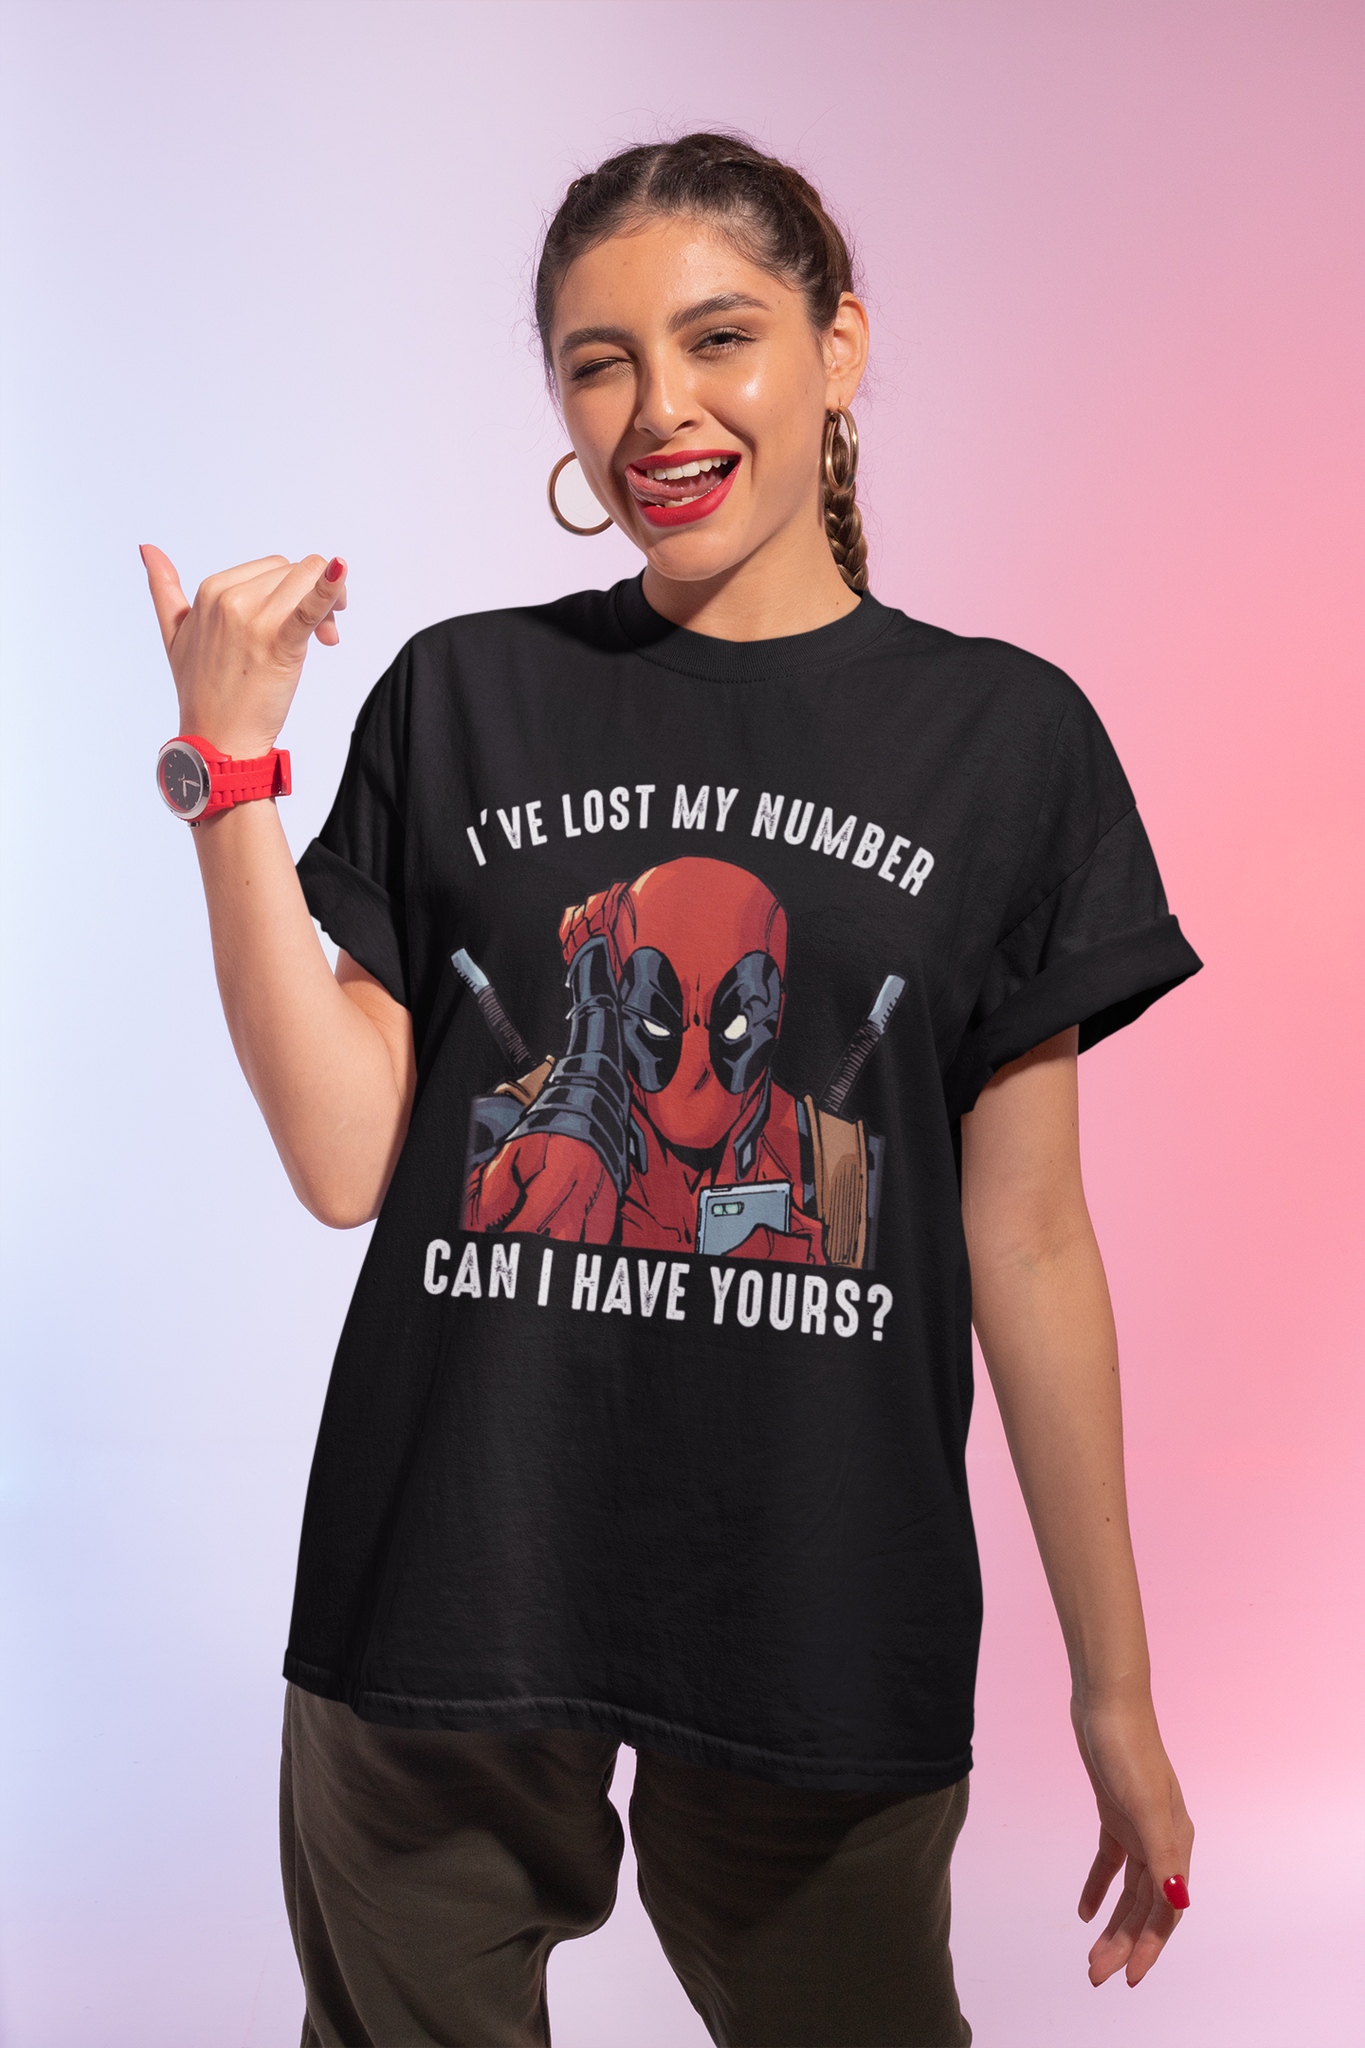 Deadpool T Shirt, Superhero Deadpool T Shirt, Ive Lost My Number Can I Have Yours Tshirt